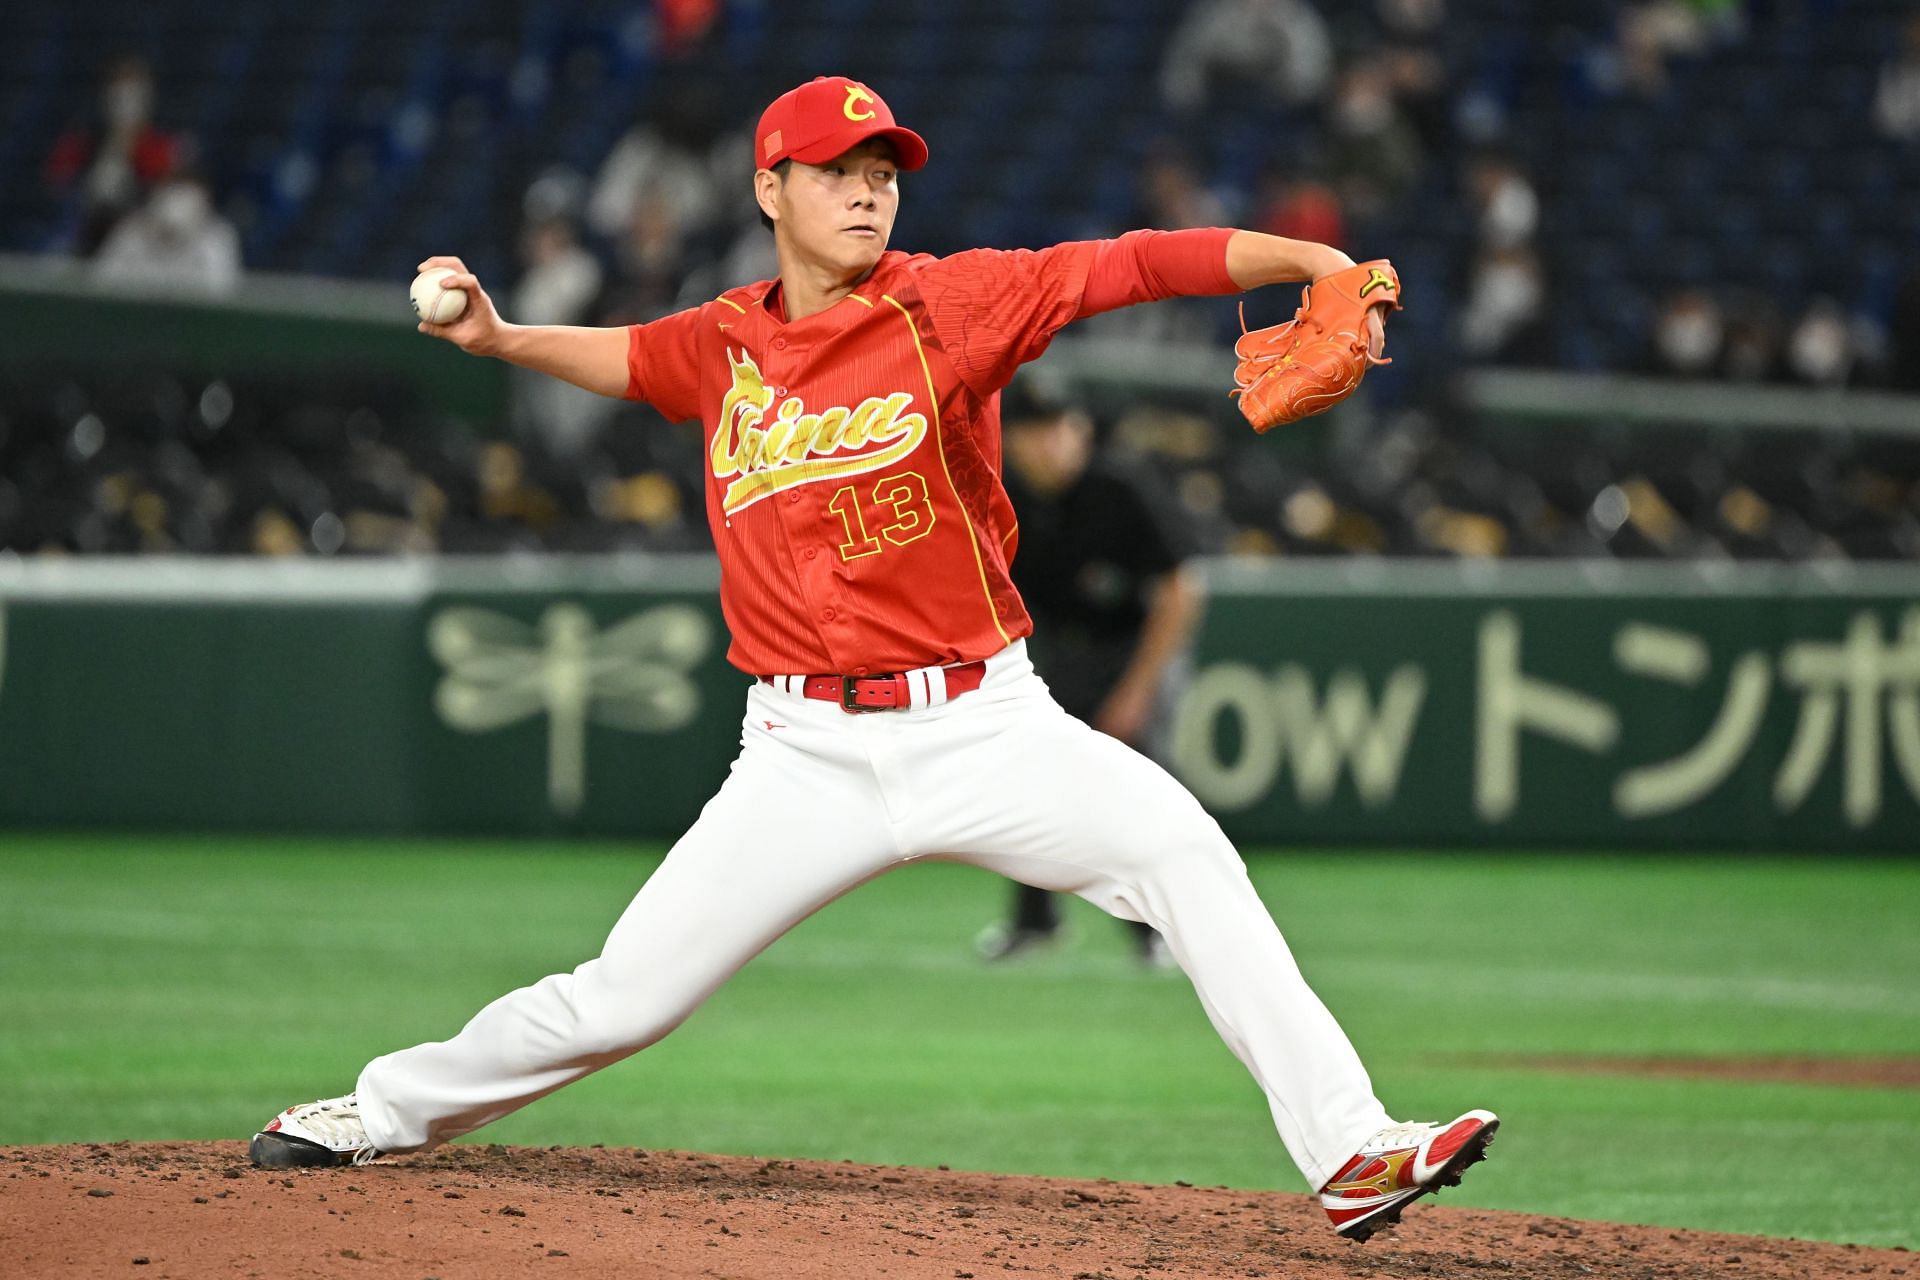 WBC Roster Preview: Team China Looks To Pull Off an Upset